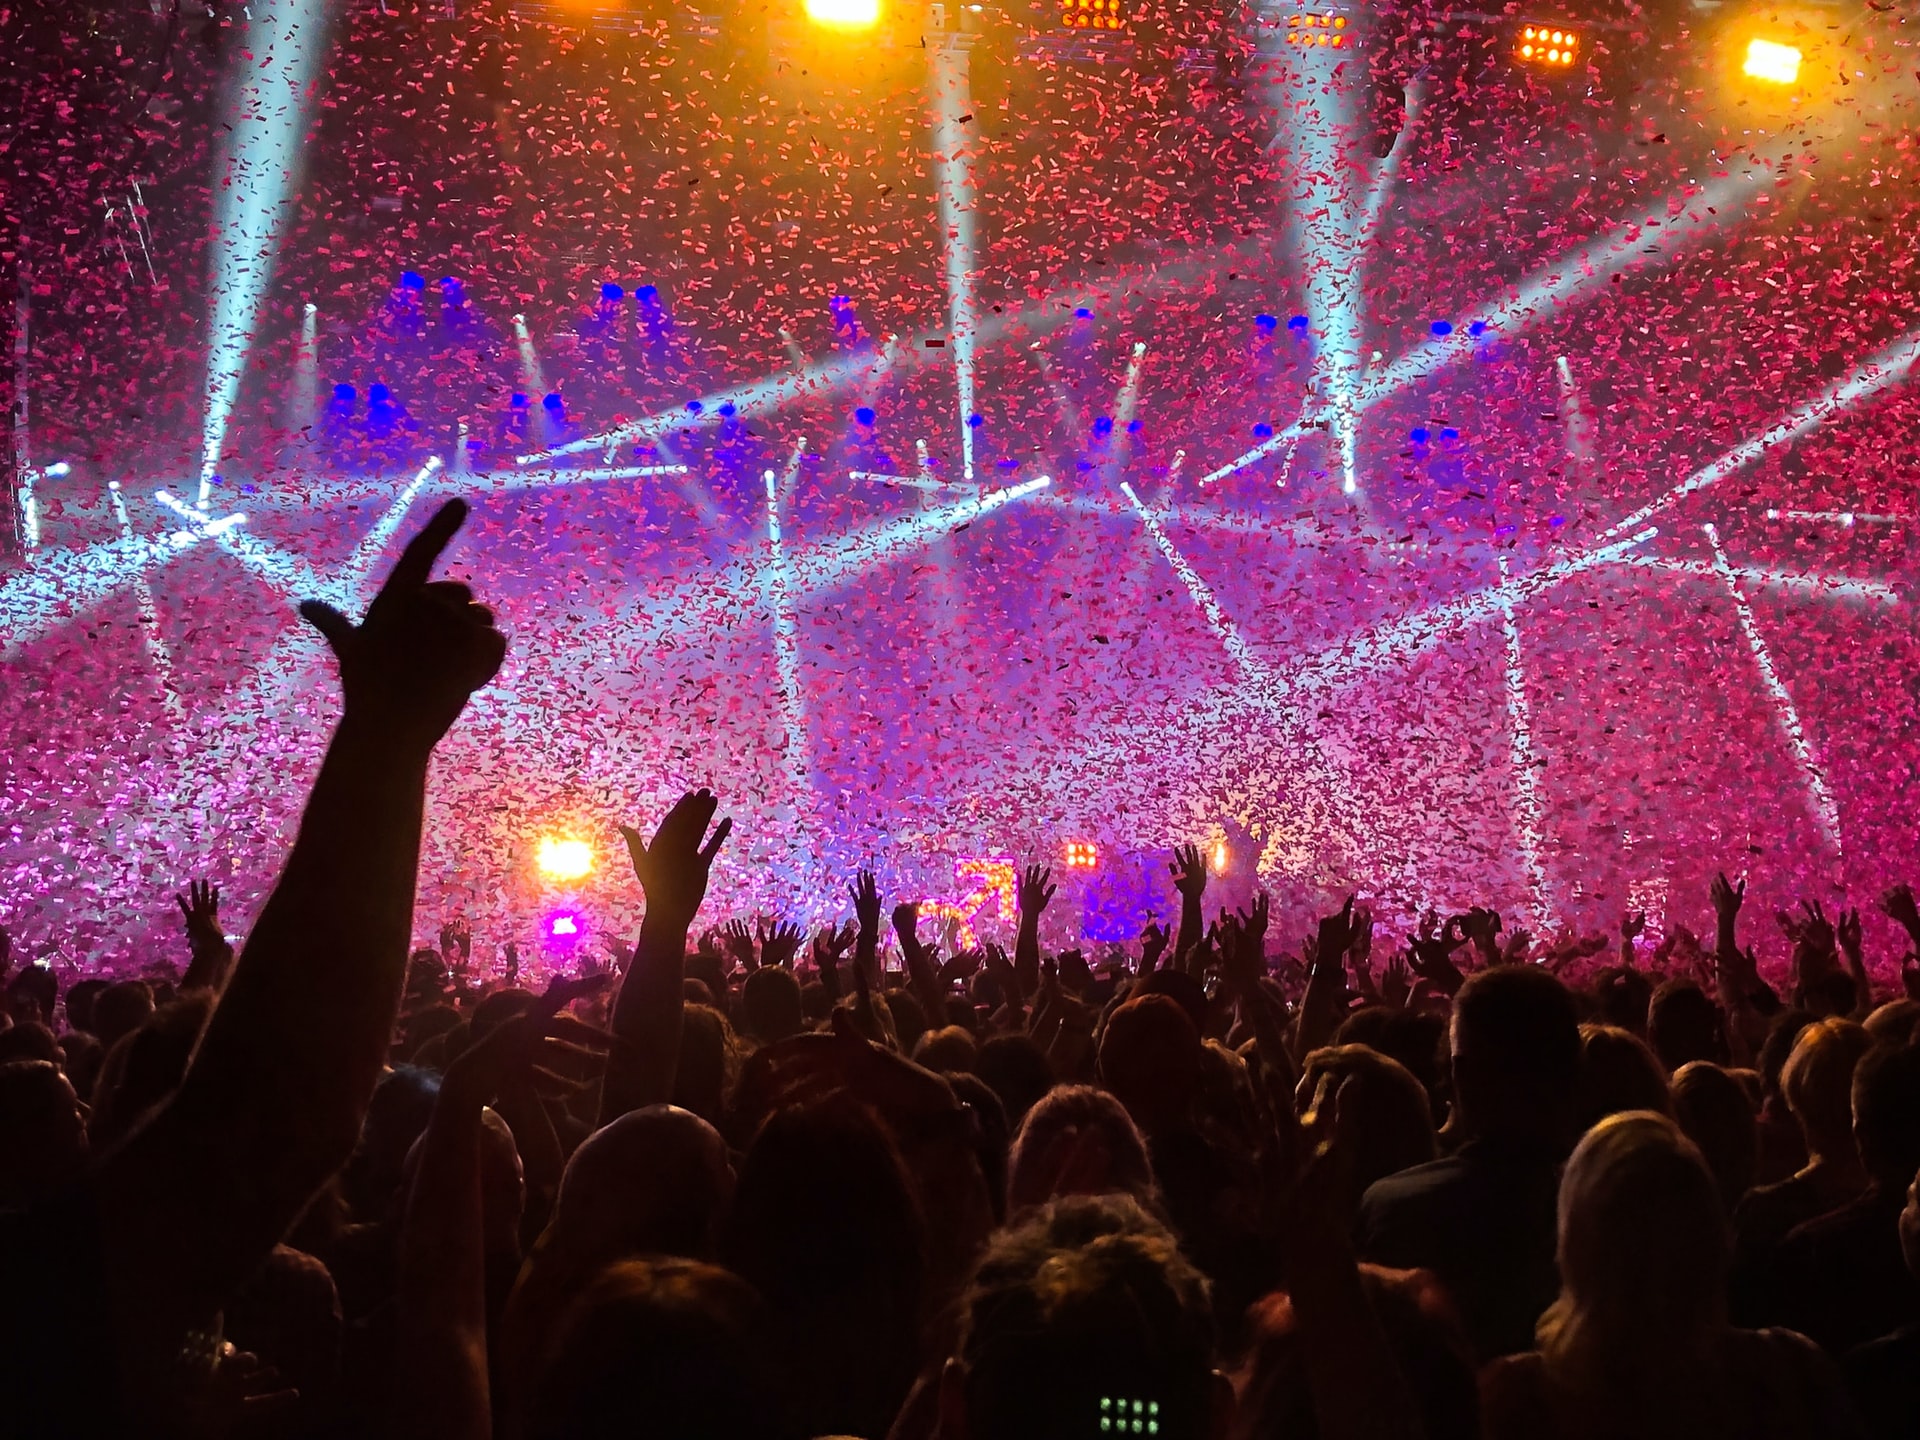 Concert scene of crowd, lights and confetti.